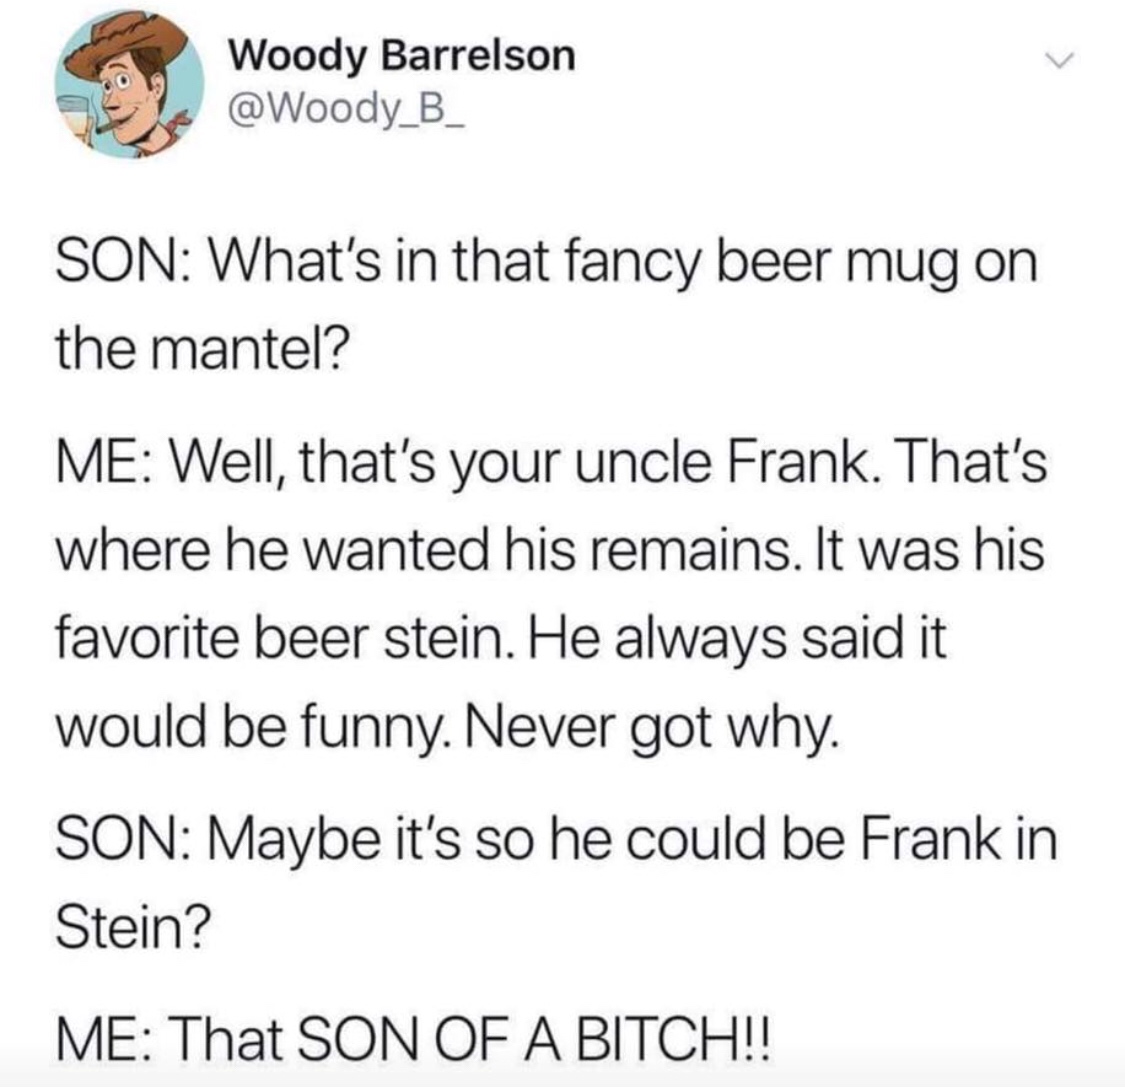 girls with dress pockets meme - Woody Barrelson Son What's in that fancy beer mug on the mantel? Me Well, that's your uncle Frank. That's where he wanted his remains. It was his favorite beer stein. He always said it would be funny. Never got why. Son May